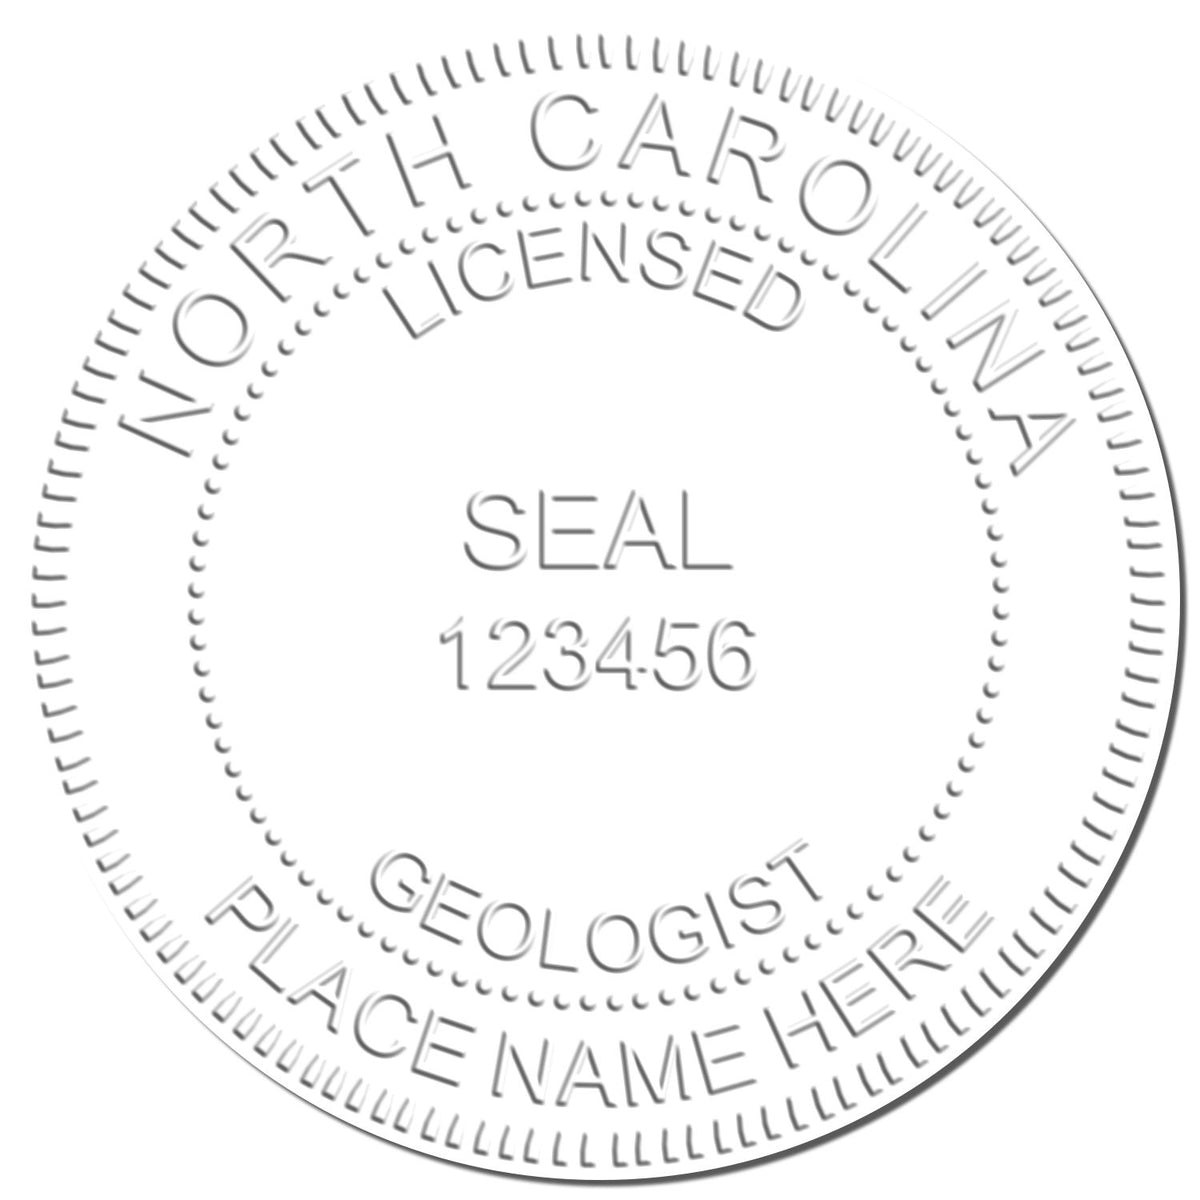 A photograph of the State of North Carolina Extended Long Reach Geologist Seal stamp impression reveals a vivid, professional image of the on paper.